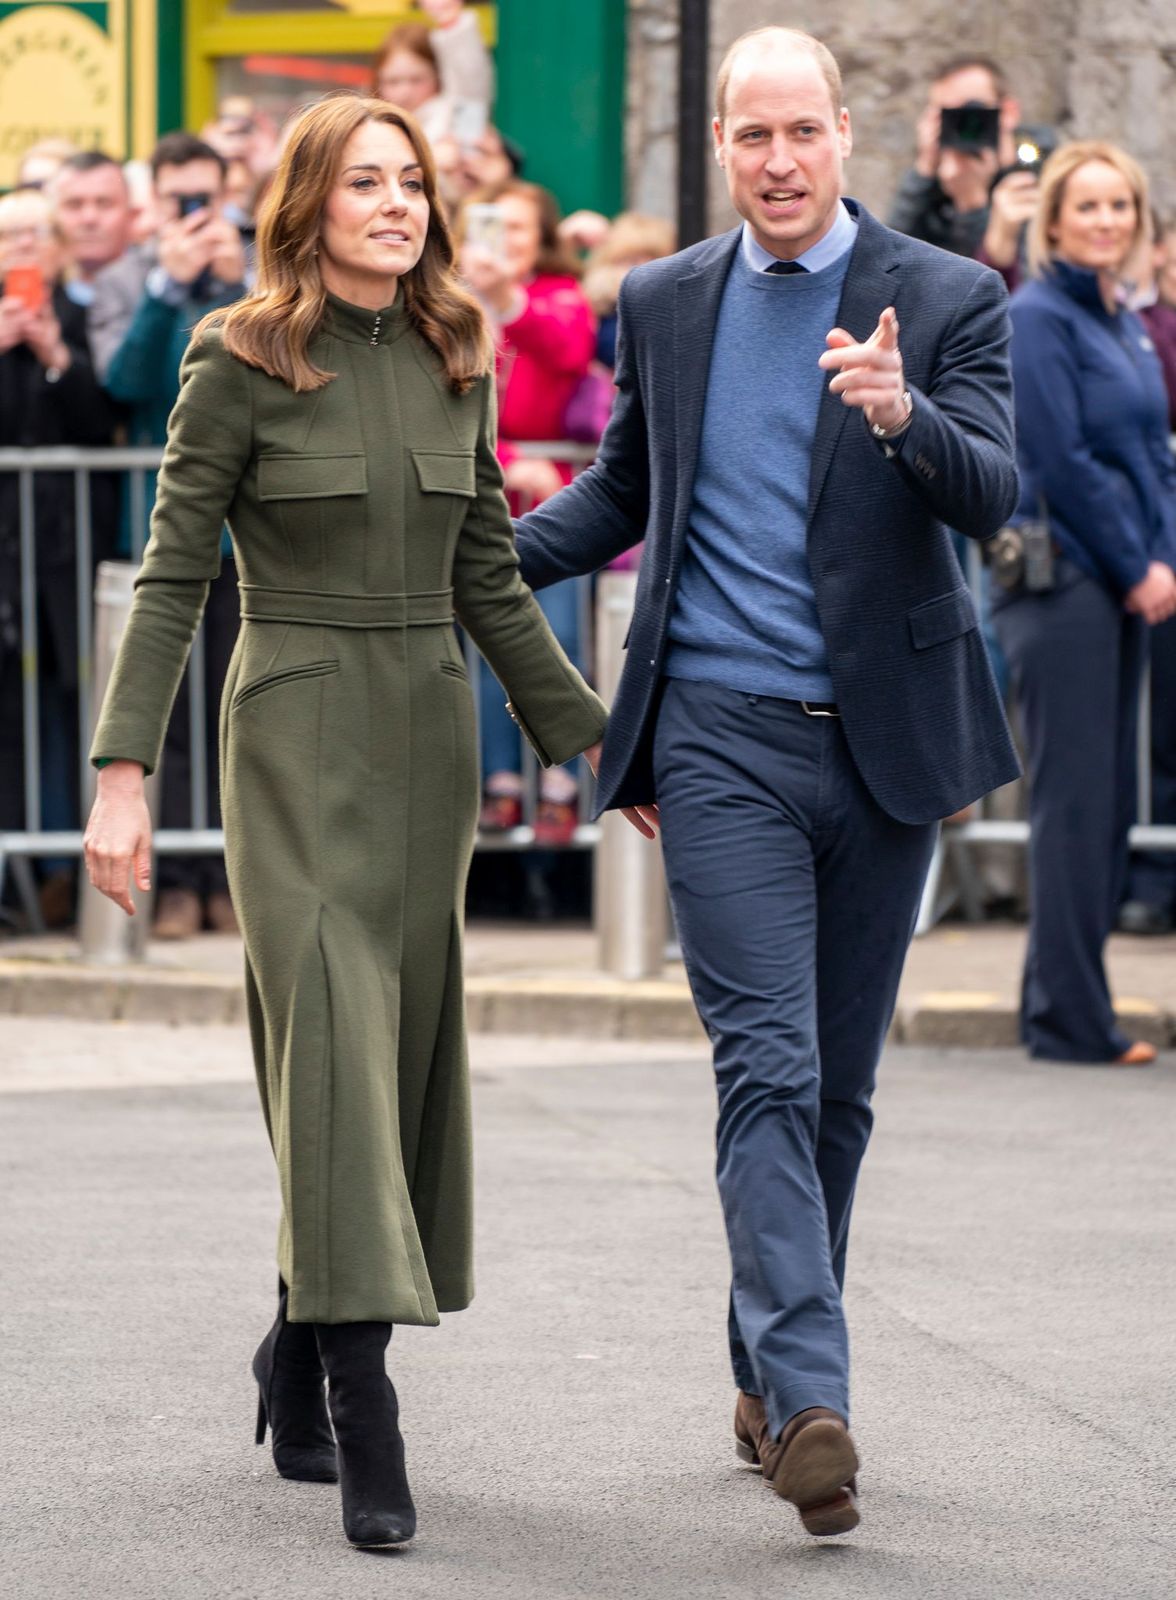 Duchess Kate and Prince William on King Street during day three of their visit to Ireland on March 5, 2020, in Galway, Ireland | Photo: Arthur Edwards - WPA Pool/Getty Images